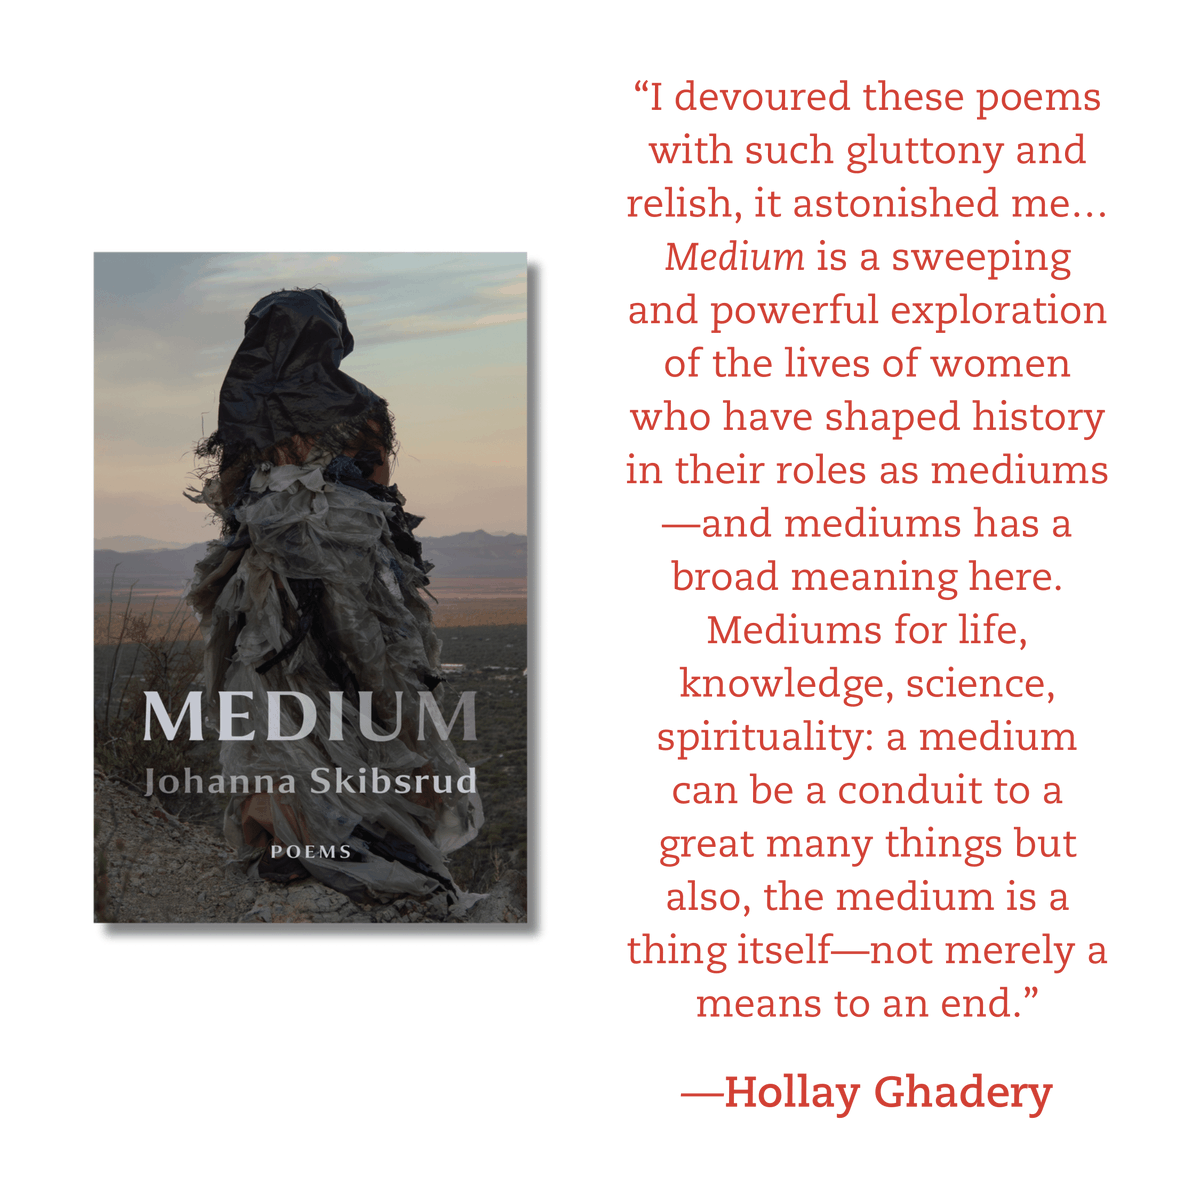 Thank you to Hollay Ghadery for this glowing review of Medium by Johanna Skibsrud! 💓💓💓